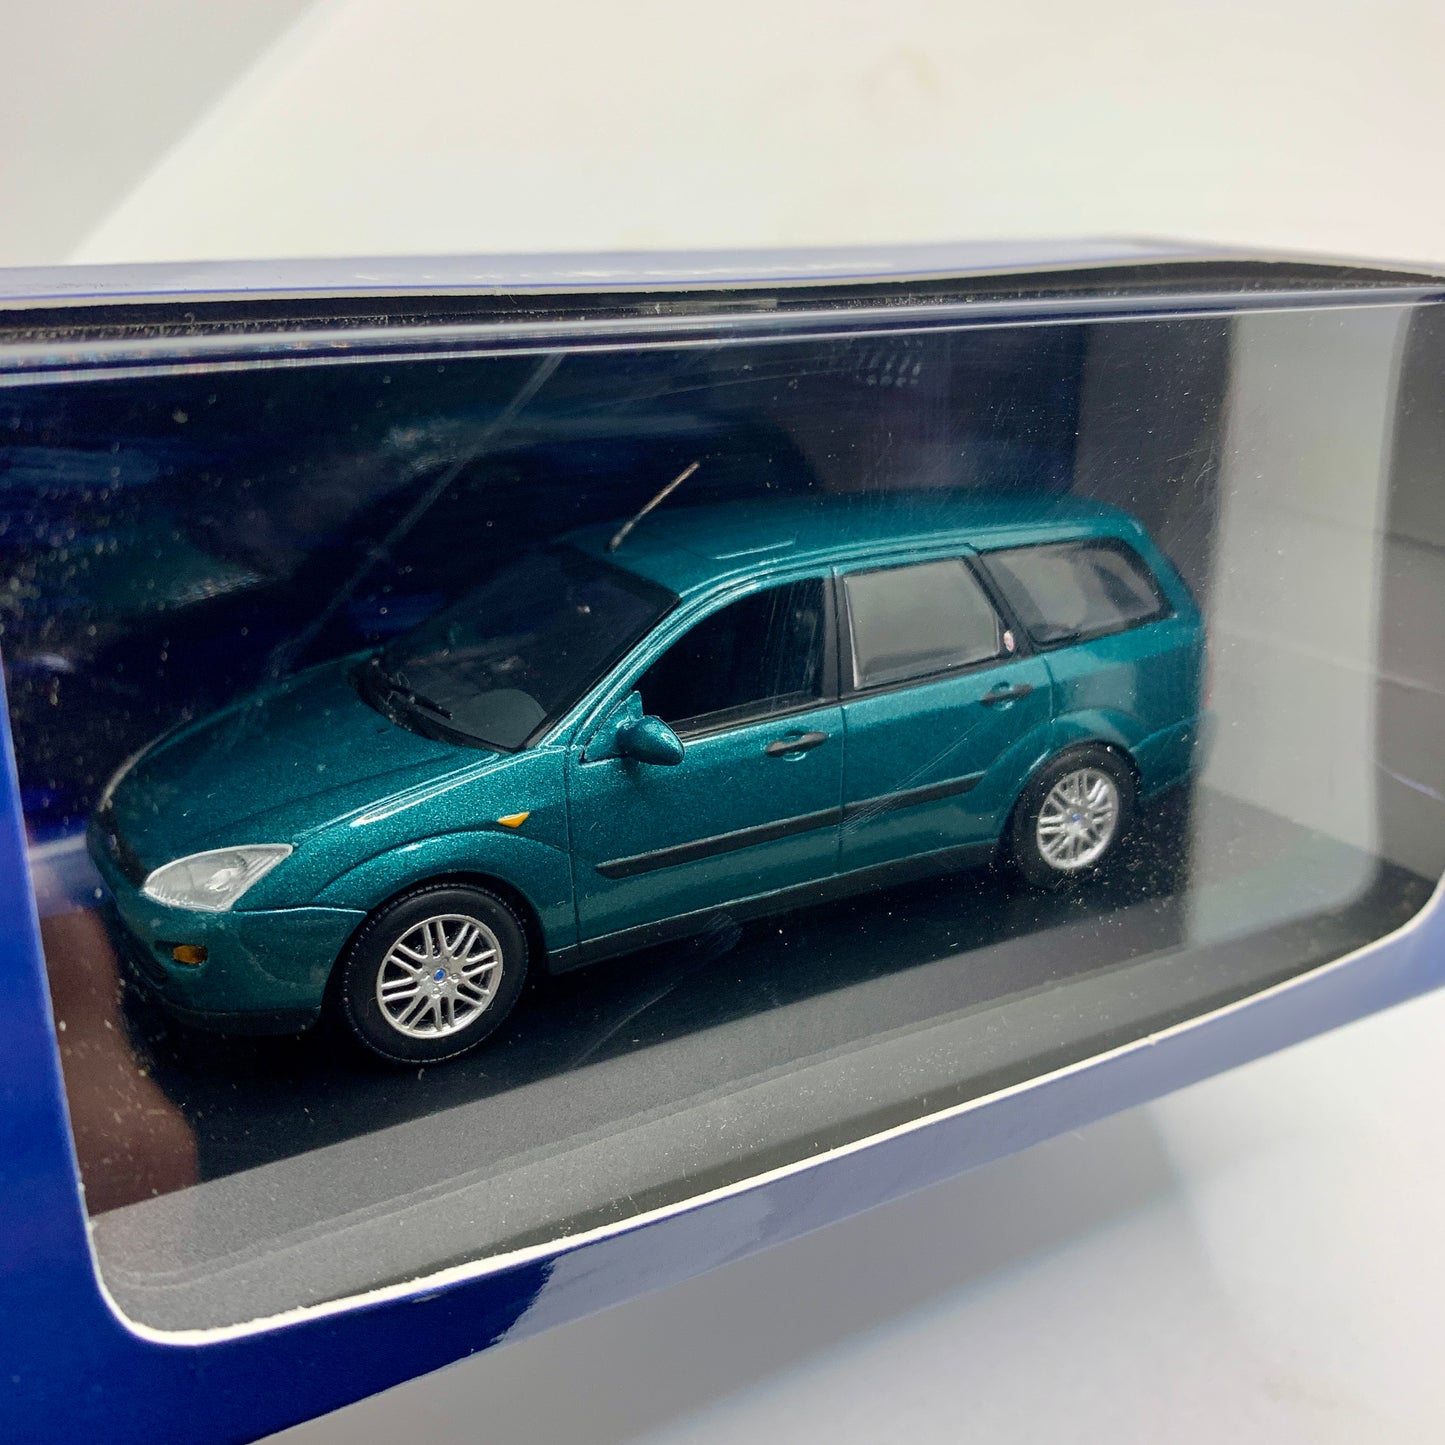 Iconic Ford Focus Collectable Classic Cars 1/43 Scale